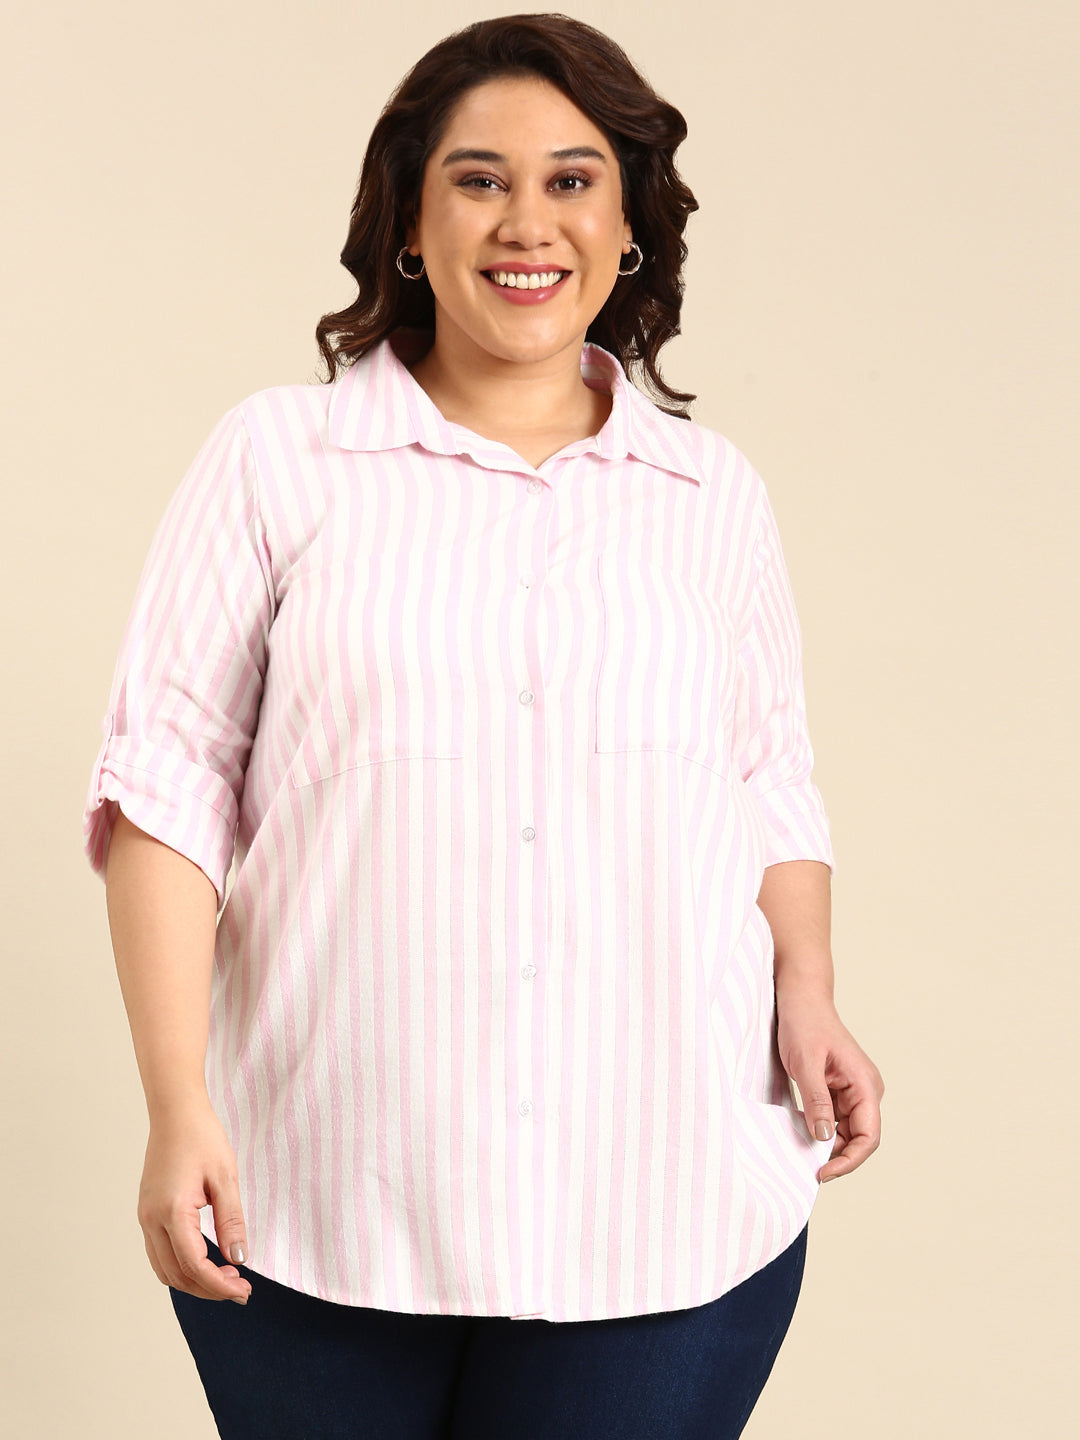 PINK AND WHITE STRIPE SHIRT WITH FRONT POCKET